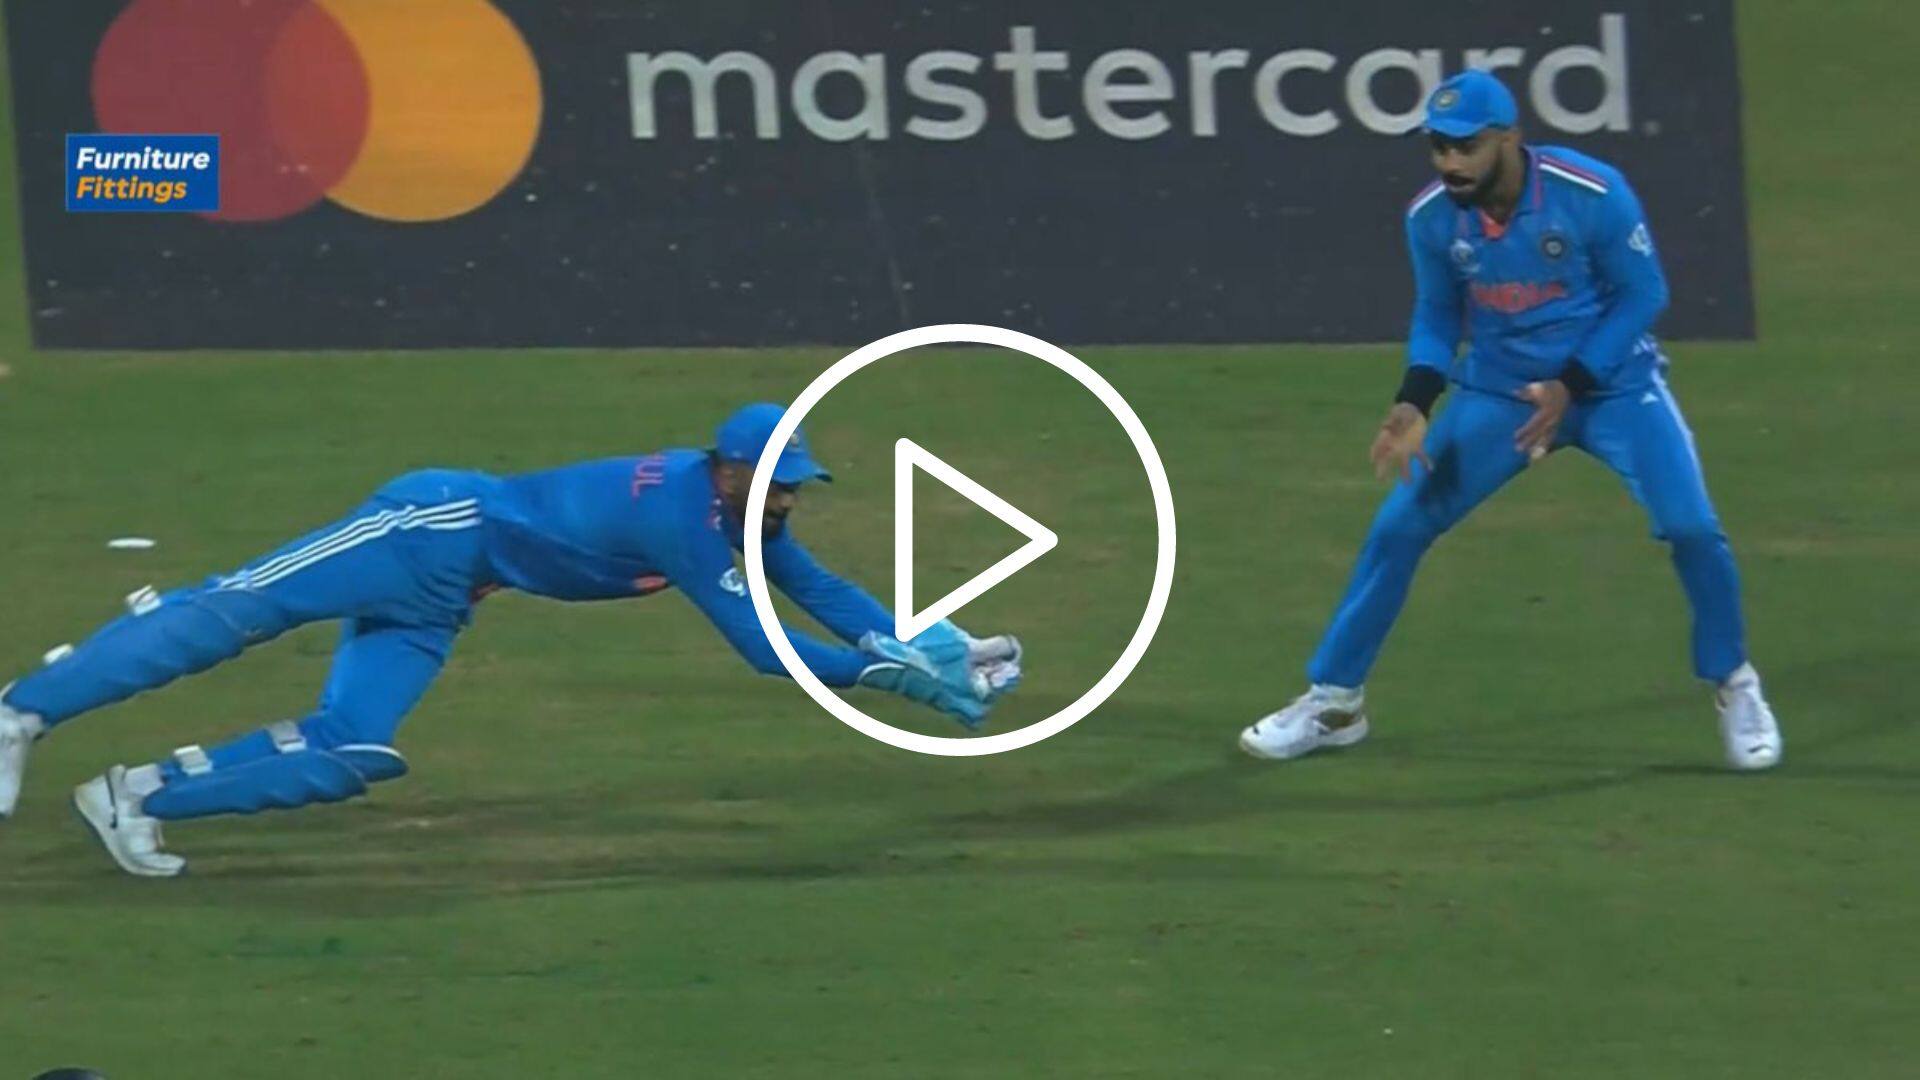 [Watch] KL Rahul Takes A Stunner As Mohammed Shami Draws First Blood For India